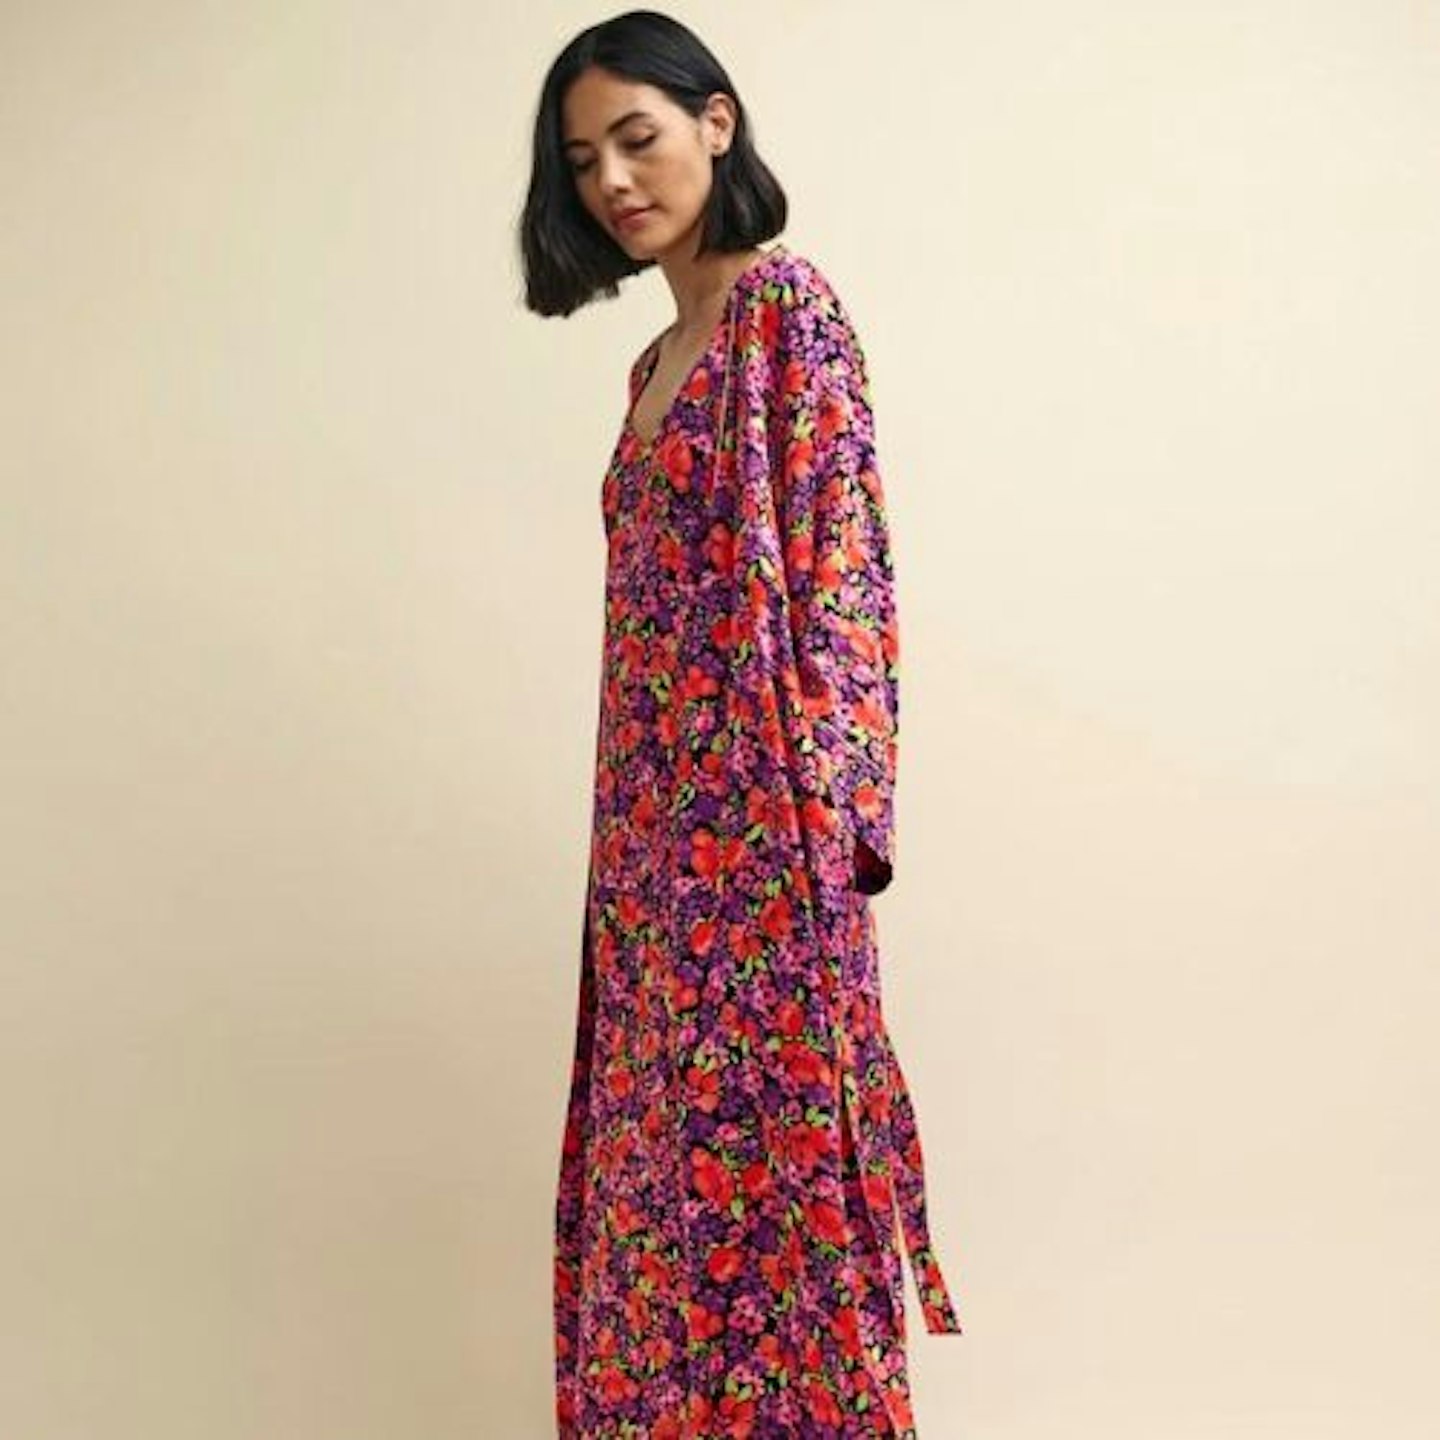 Nobody's Child, Bright Floral Pyjama Dressing Gown Robe